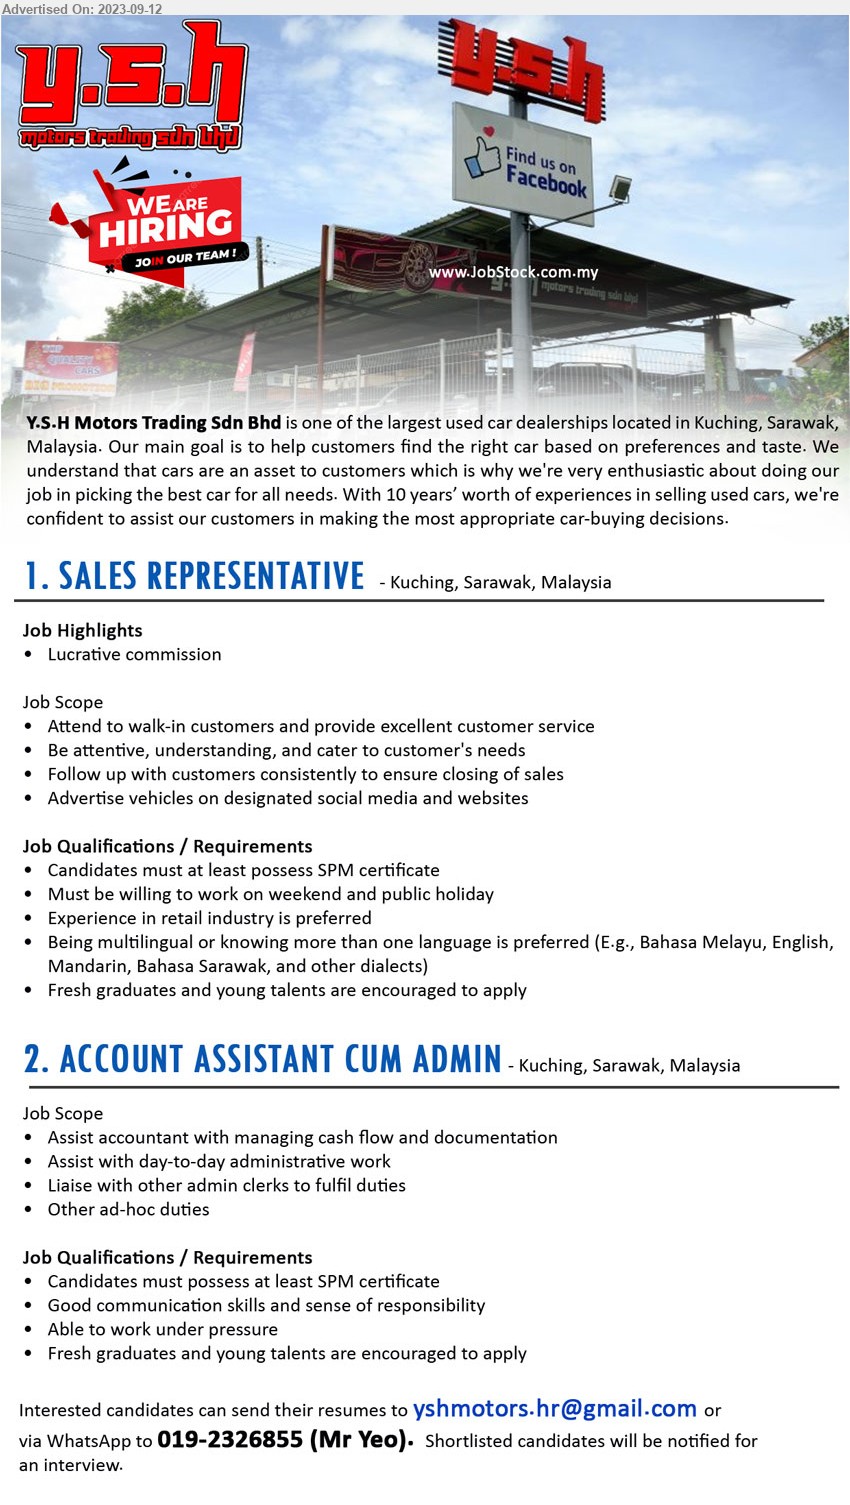 Y.S.H MOTORS TRADING SDN BHD - 1. SALES REPRESENTATIVE  (Kuching), SPM, Experience in retail industry is preferred,...
2. ACCOUNT ASSISTANT CUM ADMIN (Kuching), SPM, Fresh graduates and young talents are encouraged to apply,...
WhatsApp to 019-2326855 (Mr Yeo) / Email resume to ...